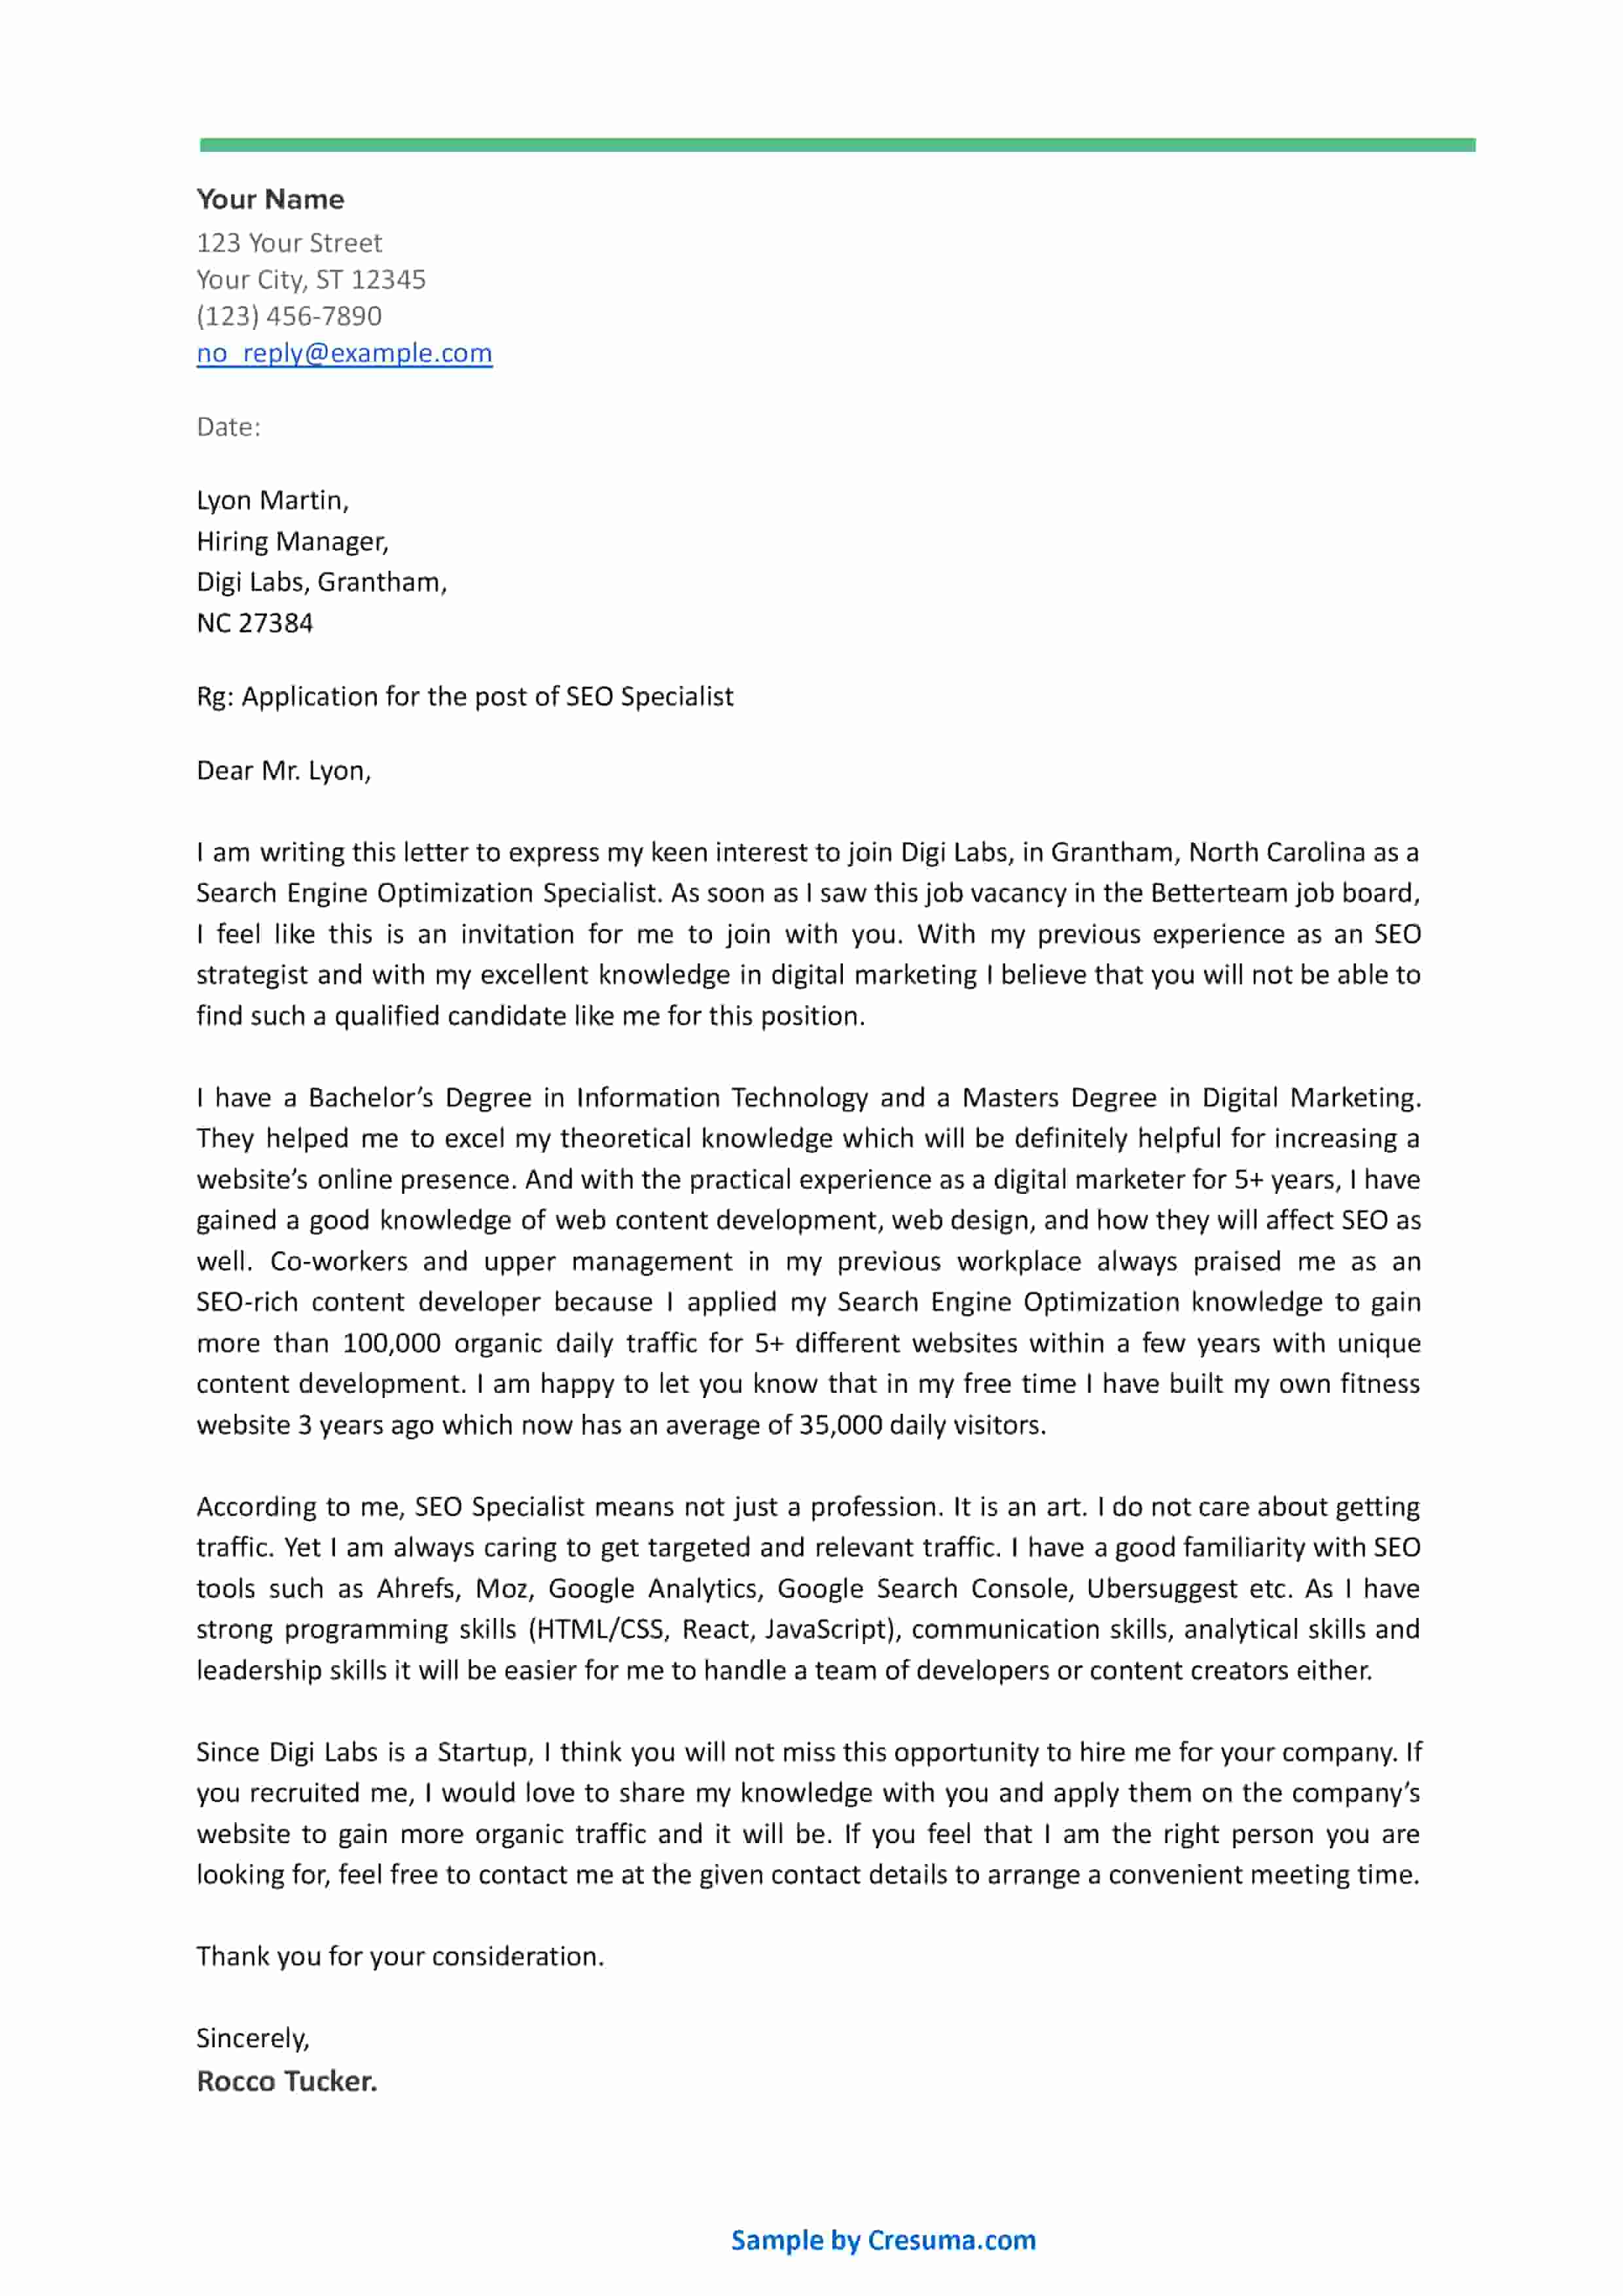 SEO Specialist cover letter example template 2